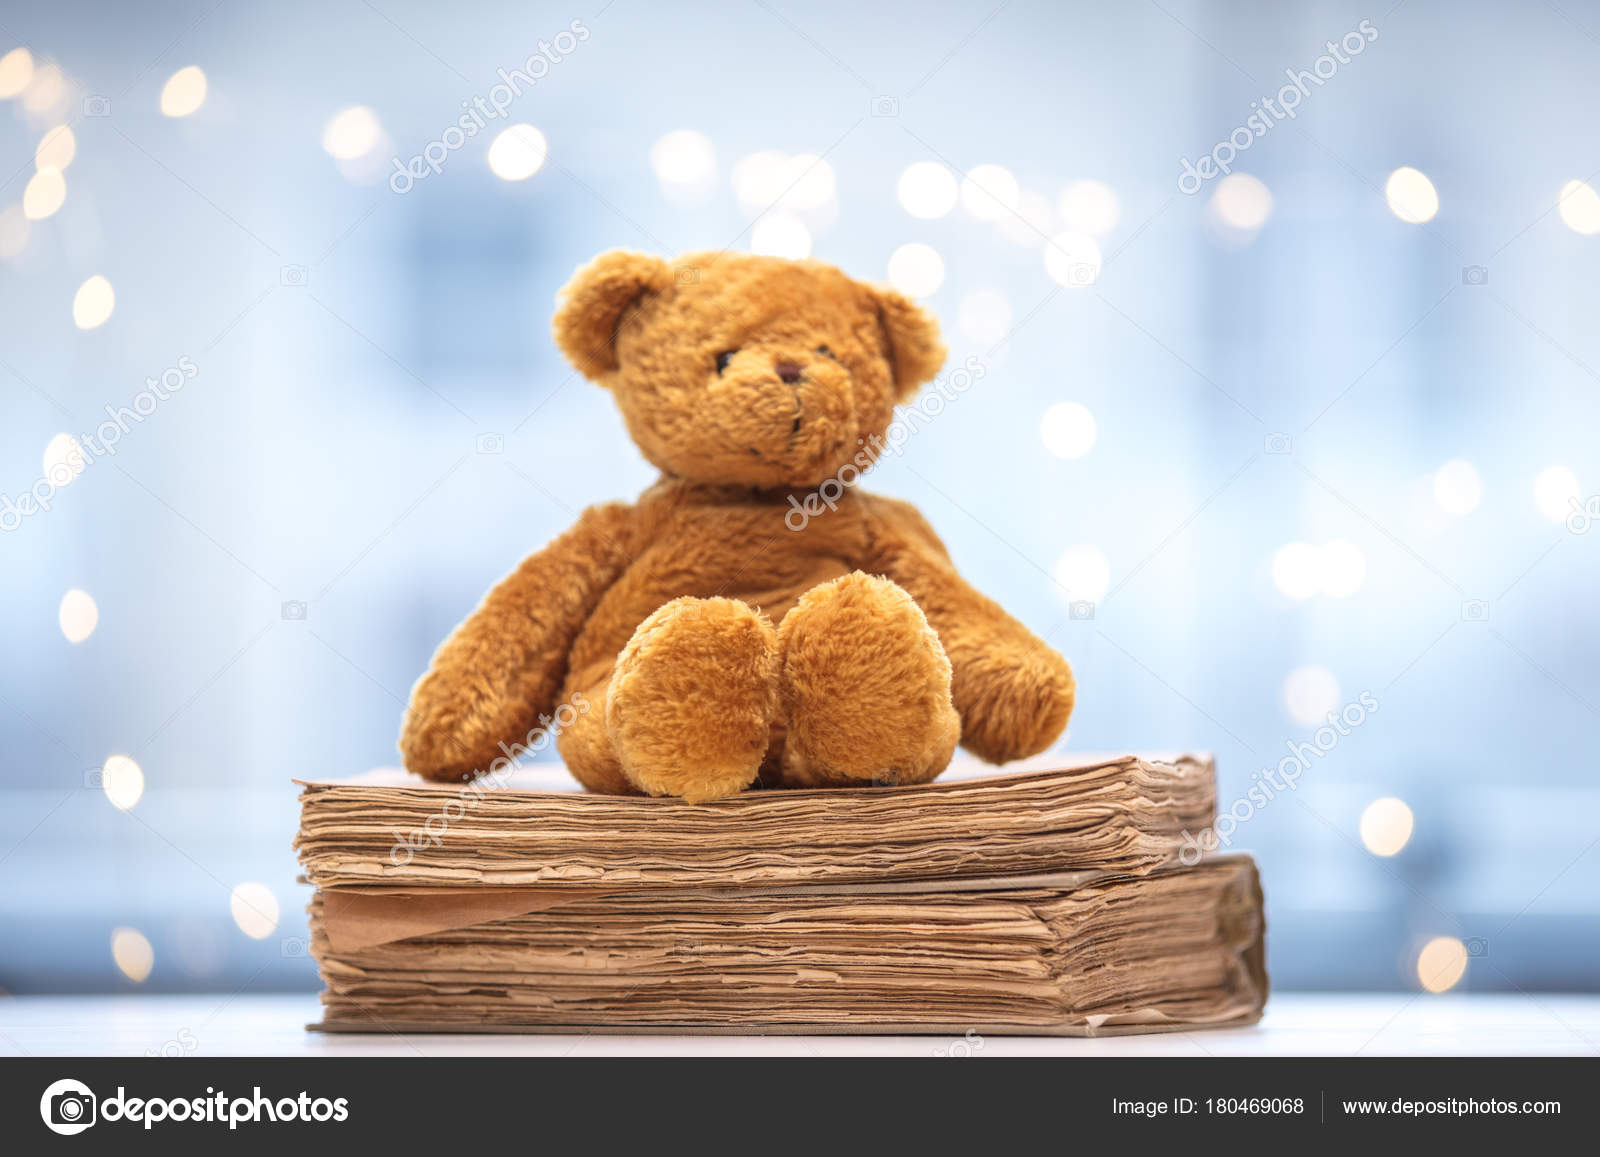 Teddy bear soft toy with old books on fairy lights stock photo by verasimon